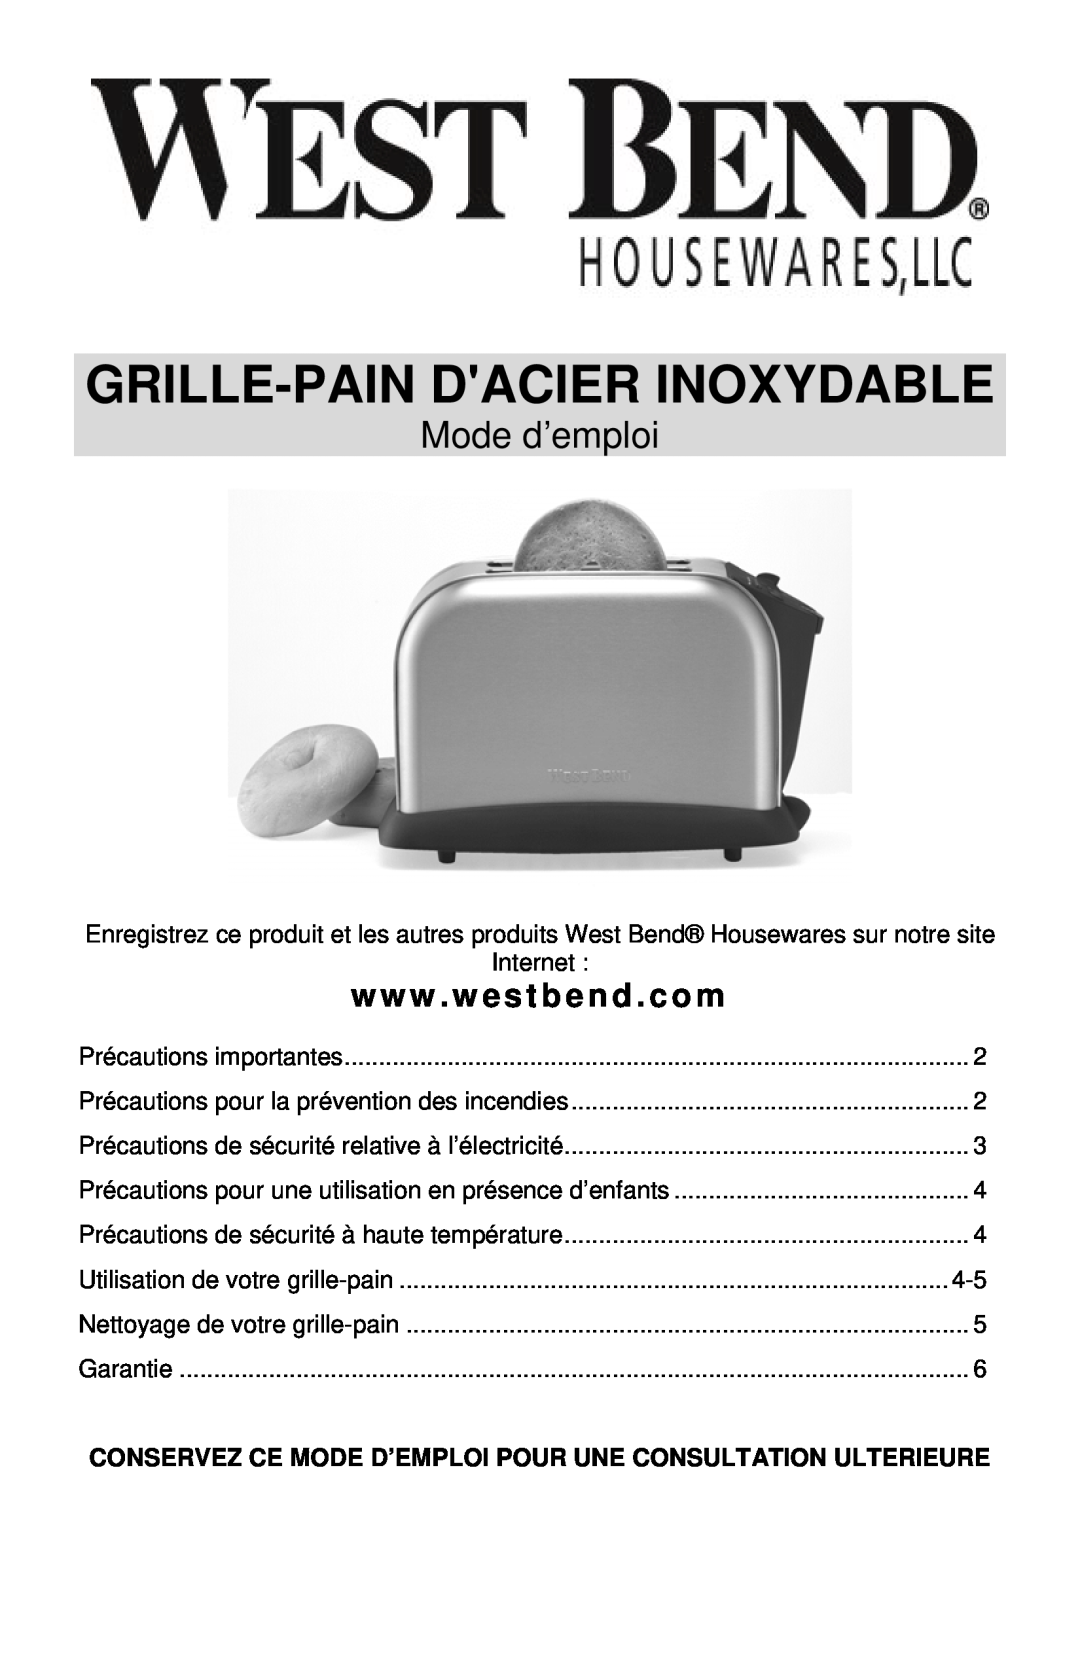 West Bend STAINLESS STEEL TOASTER instruction manual Grille-Paindacier Inoxydable, Mode d’emploi, www . westbend . com 